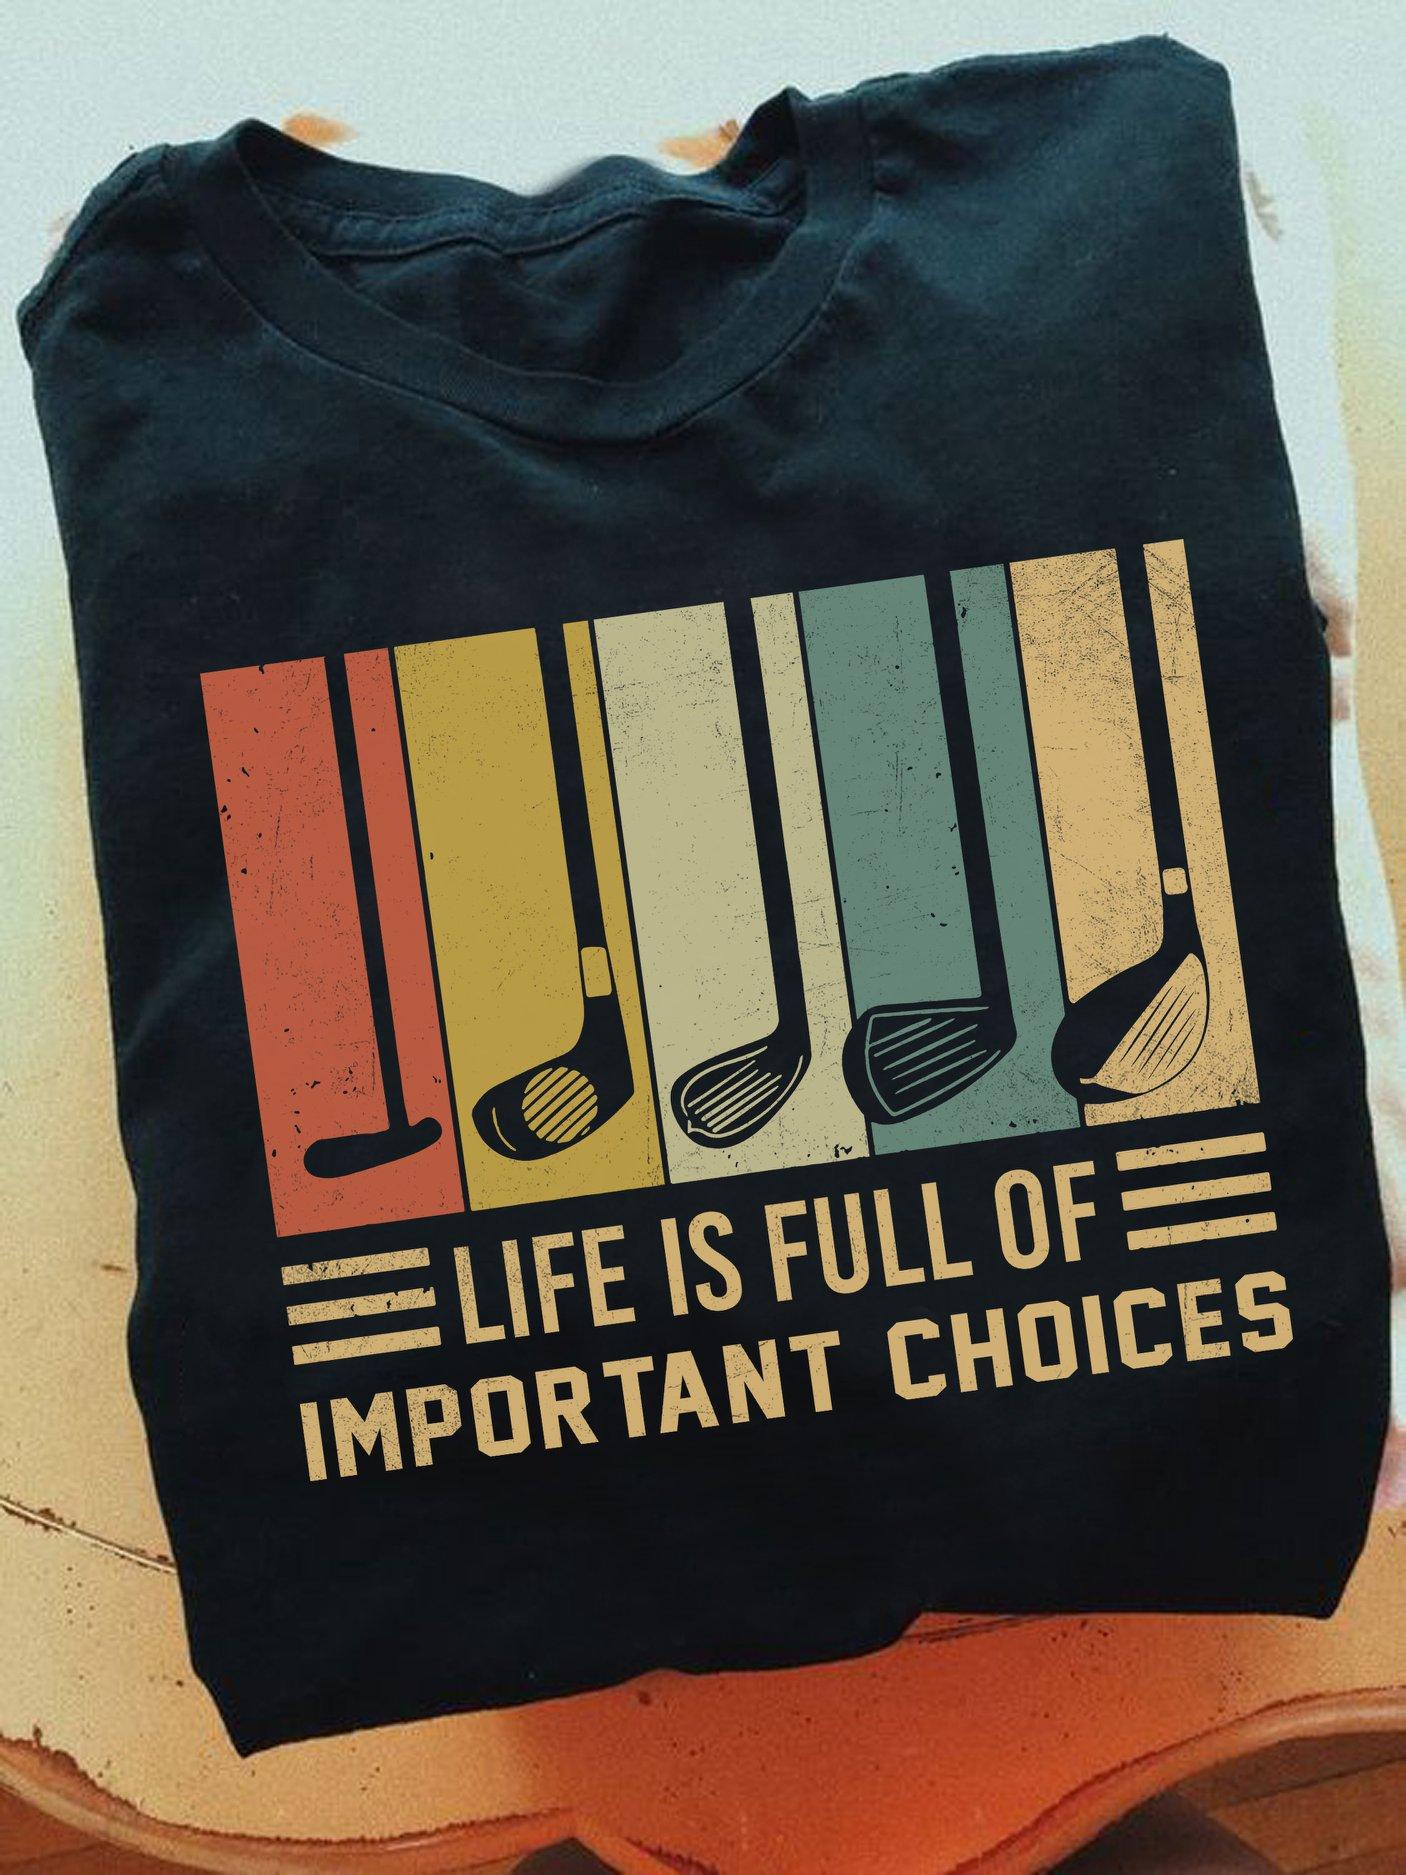 Life is full of important choices - Golf clubs collection, gift for golfers